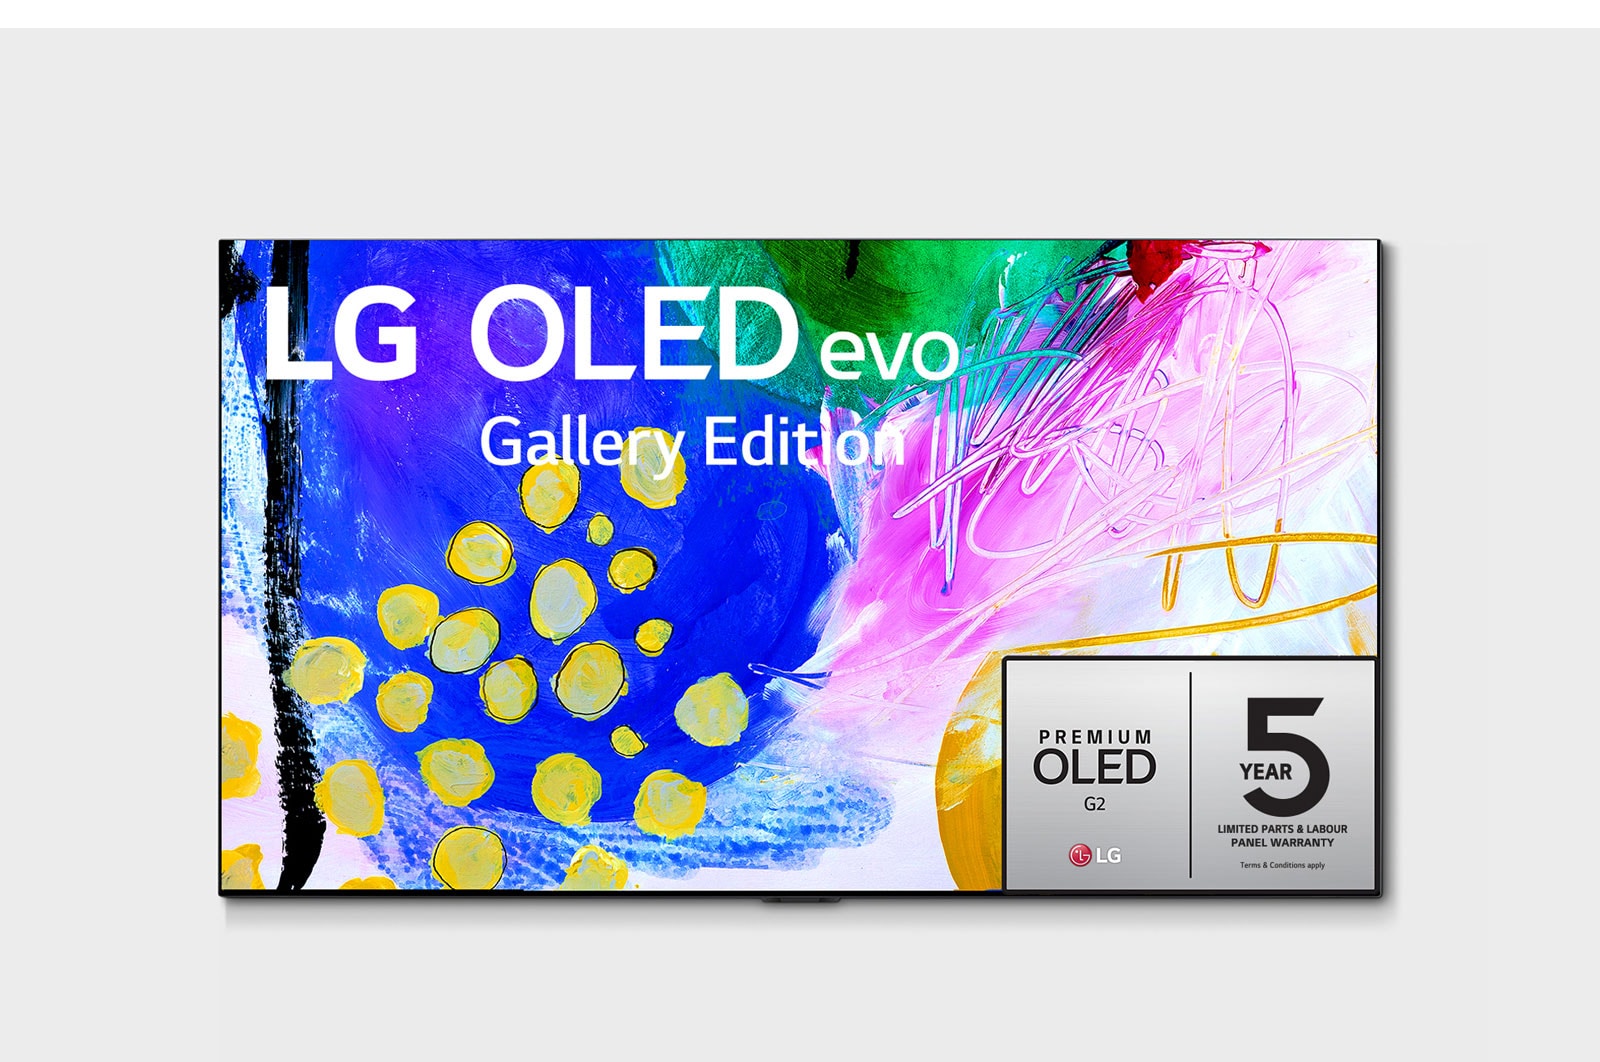 LG OLED evo G2 97 inch TV 4K Smart TV | Gallery Edition | Wall mounted TV | TV wall design | Ultra HD 4K resolution | AI ThinQ, OLED97G2PSA